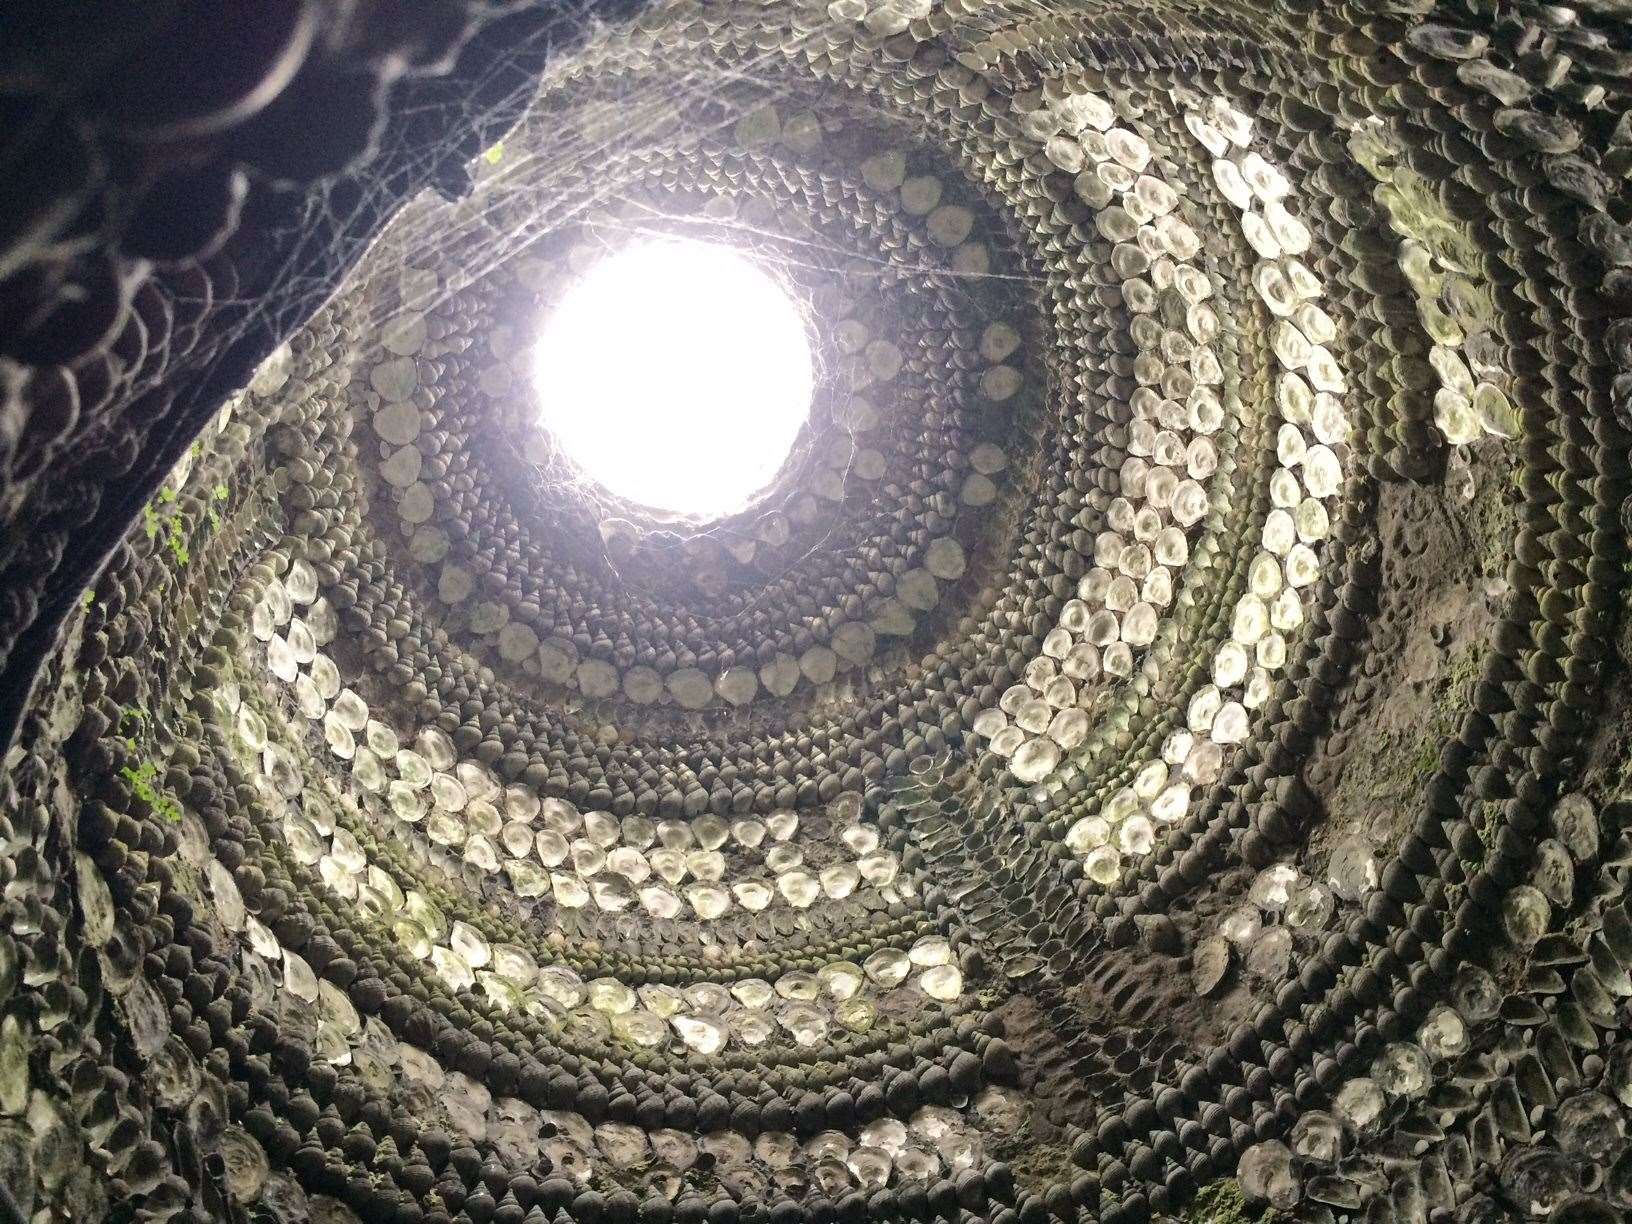 The Shell Grotto is a remarkable - and highly unusual - place